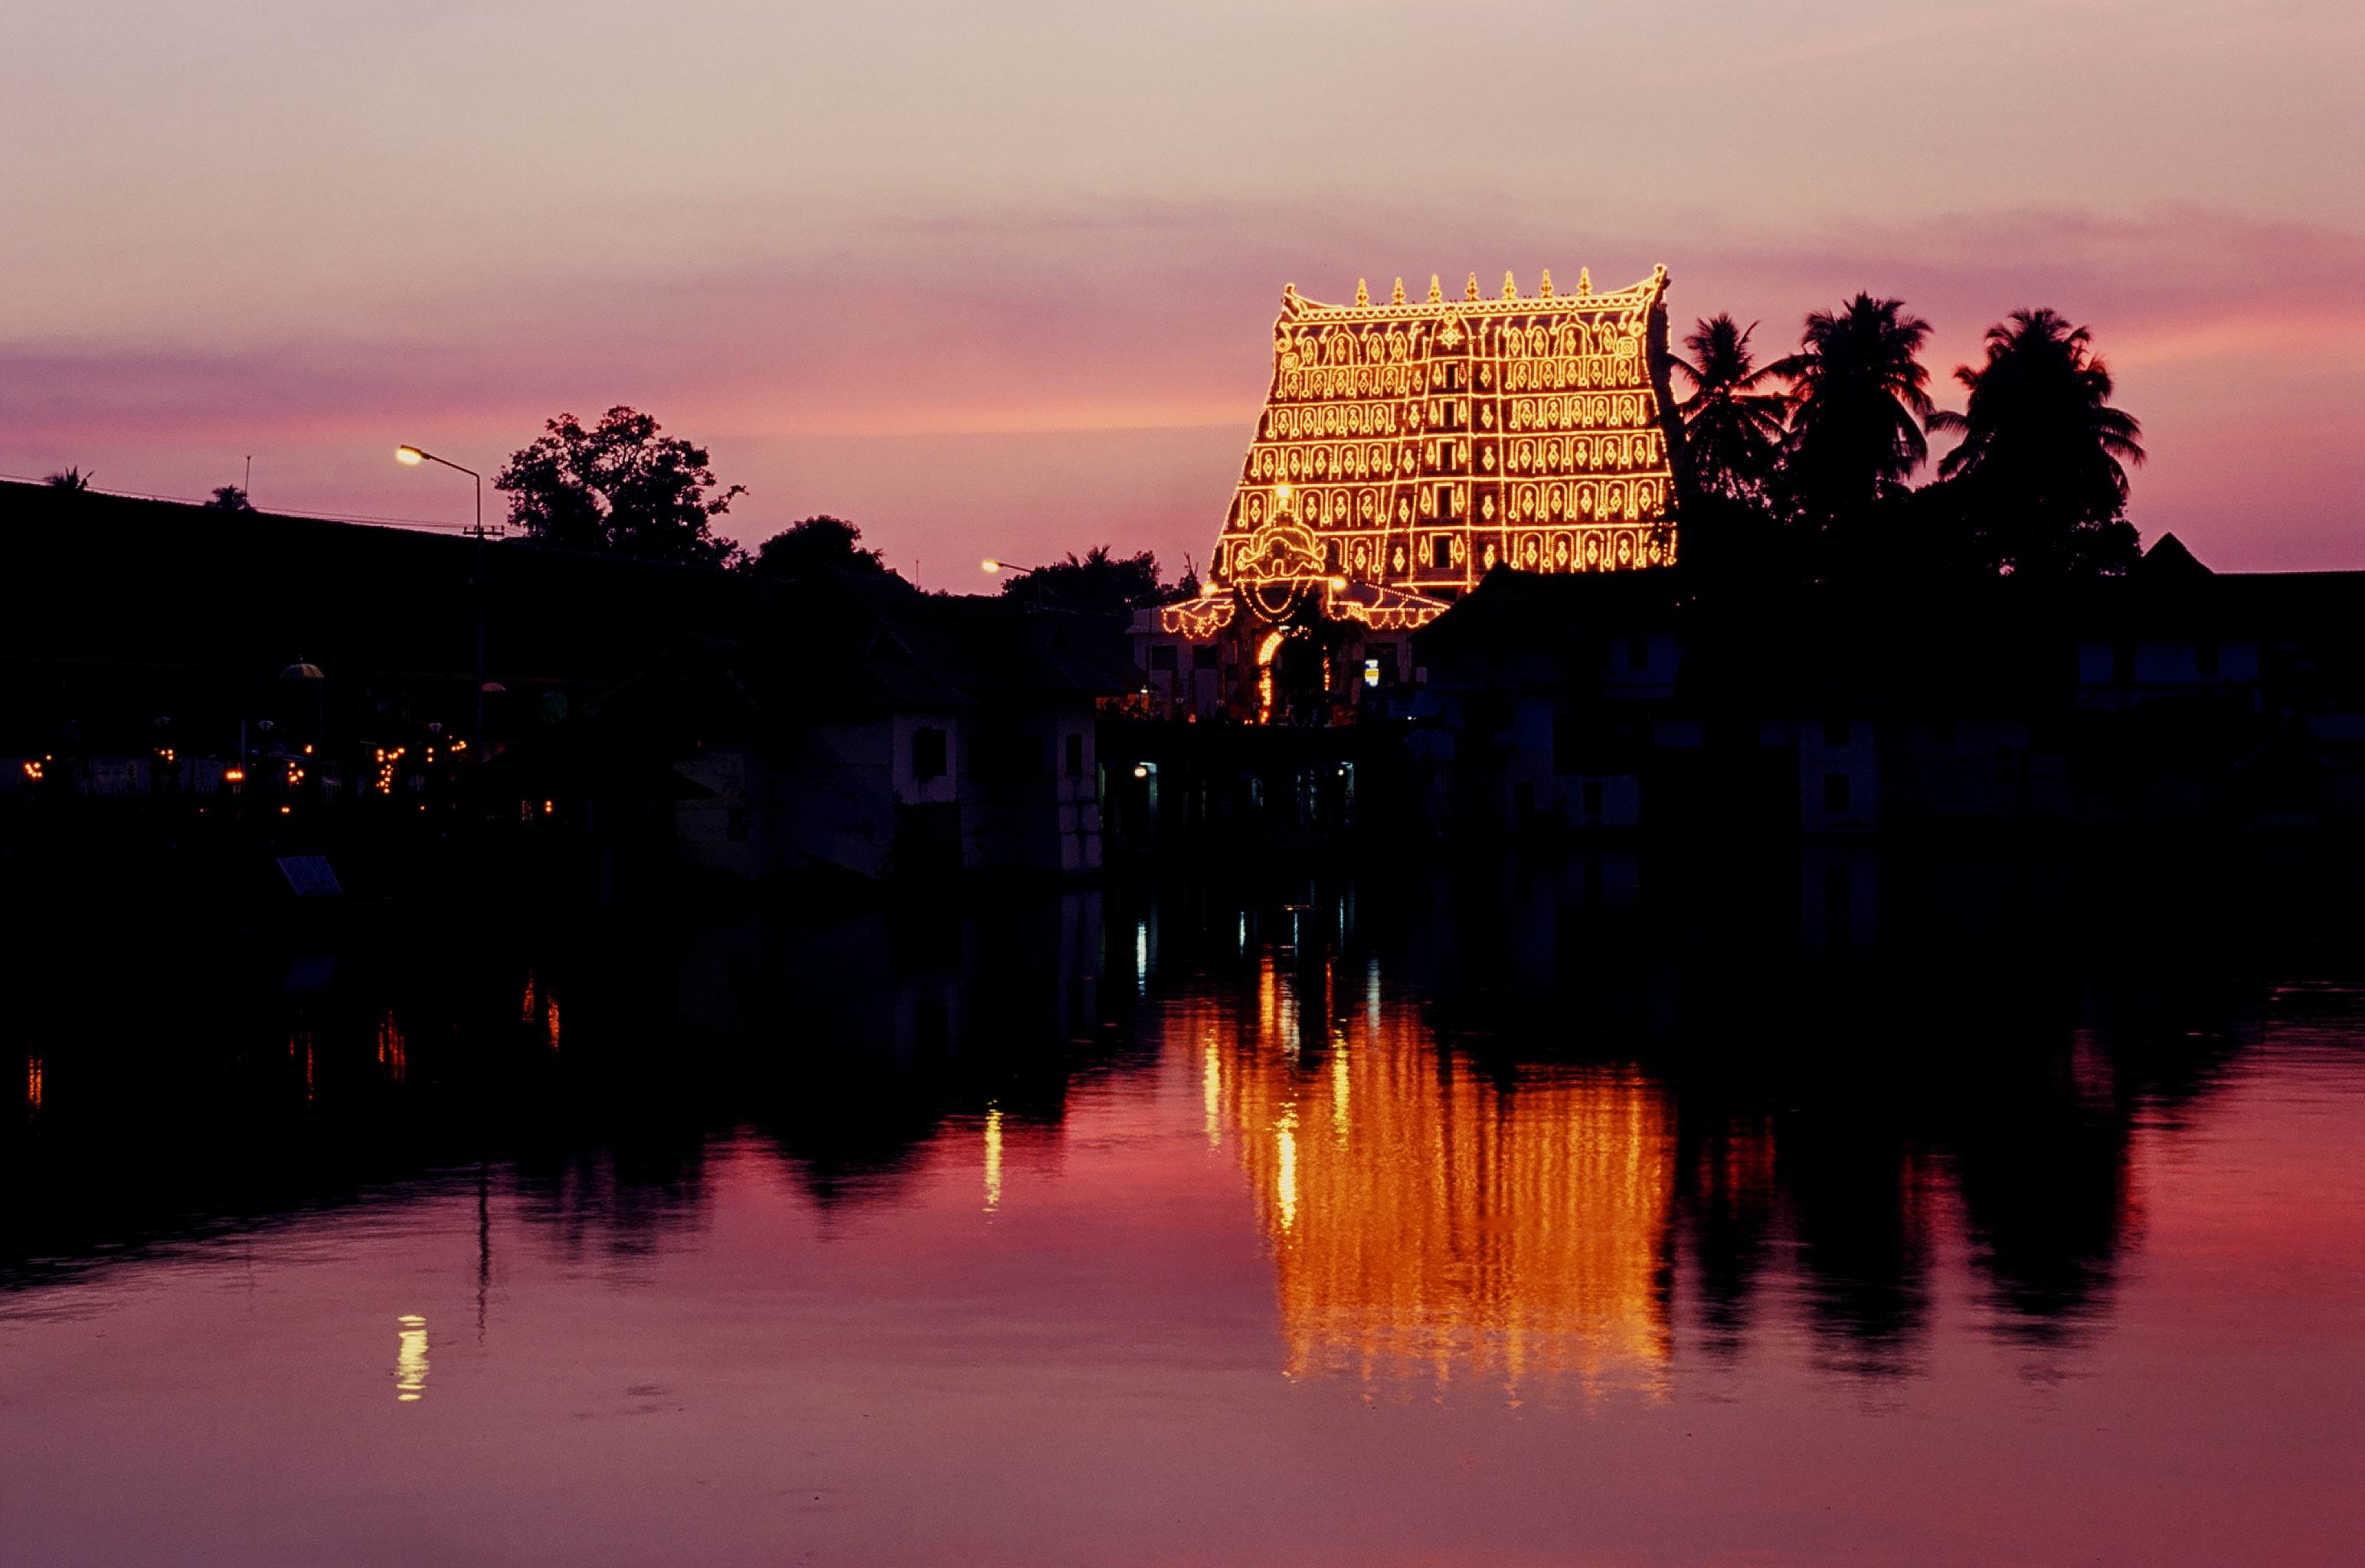 Sri Padmanabhaswamy Temple - The richest temple in India